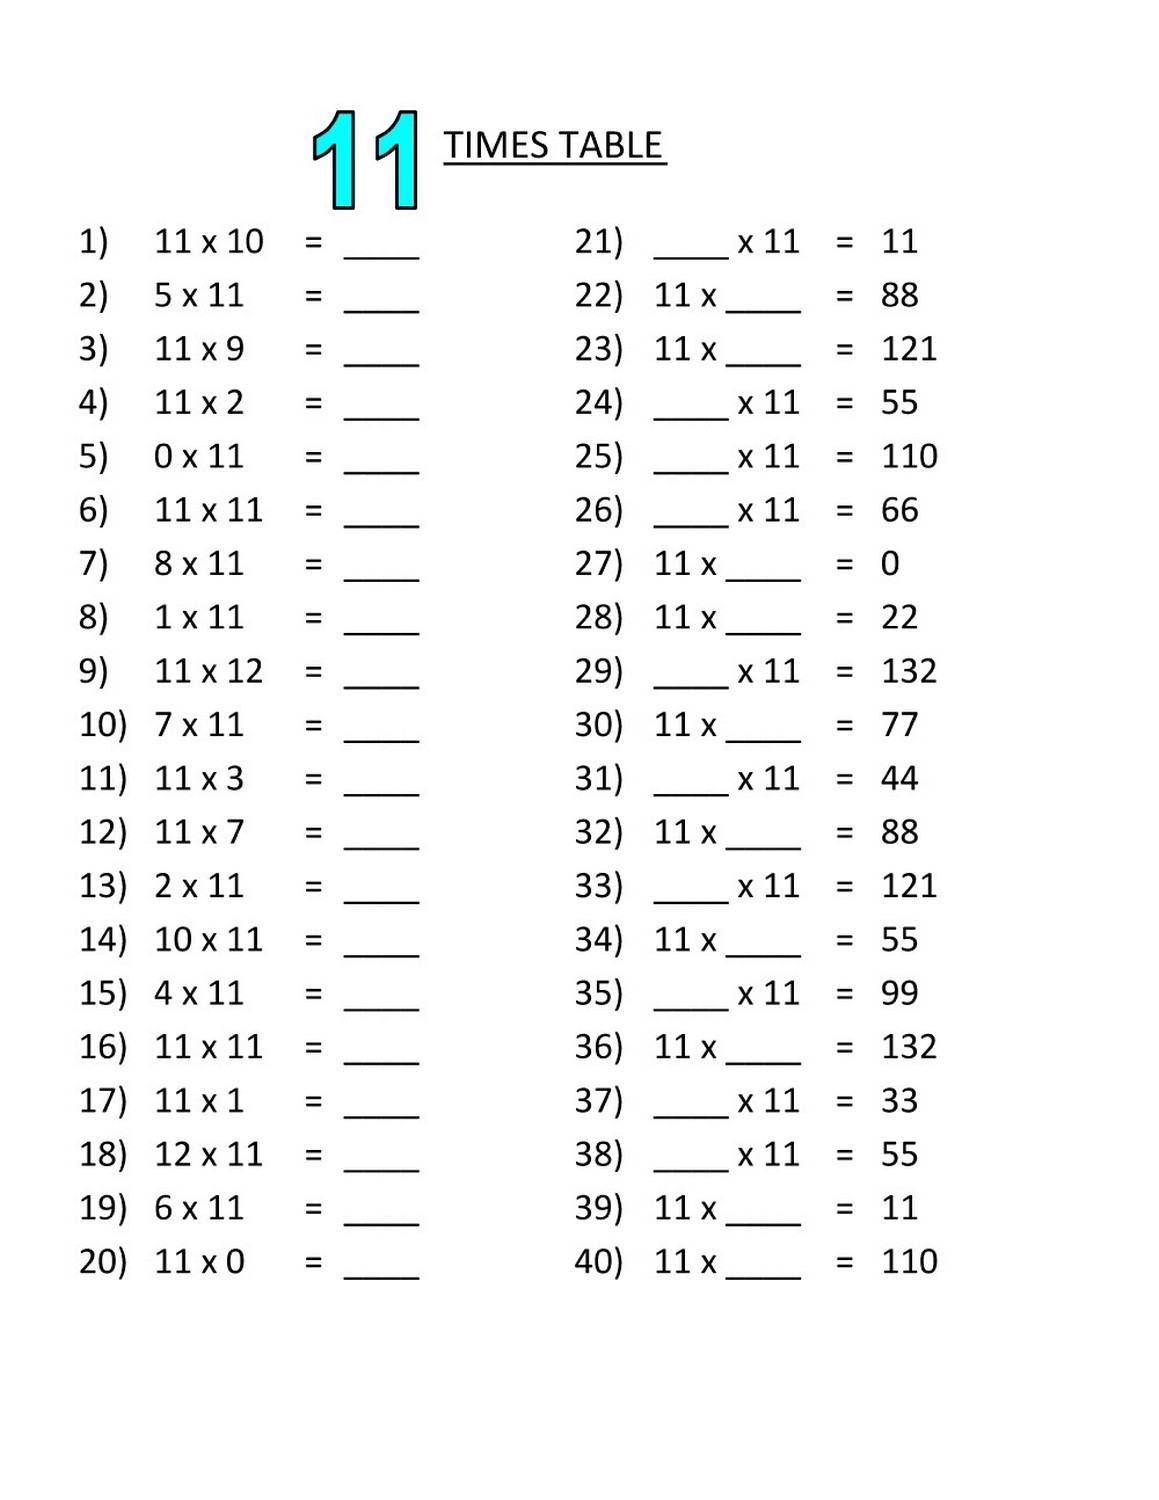 times table exercise basic activity